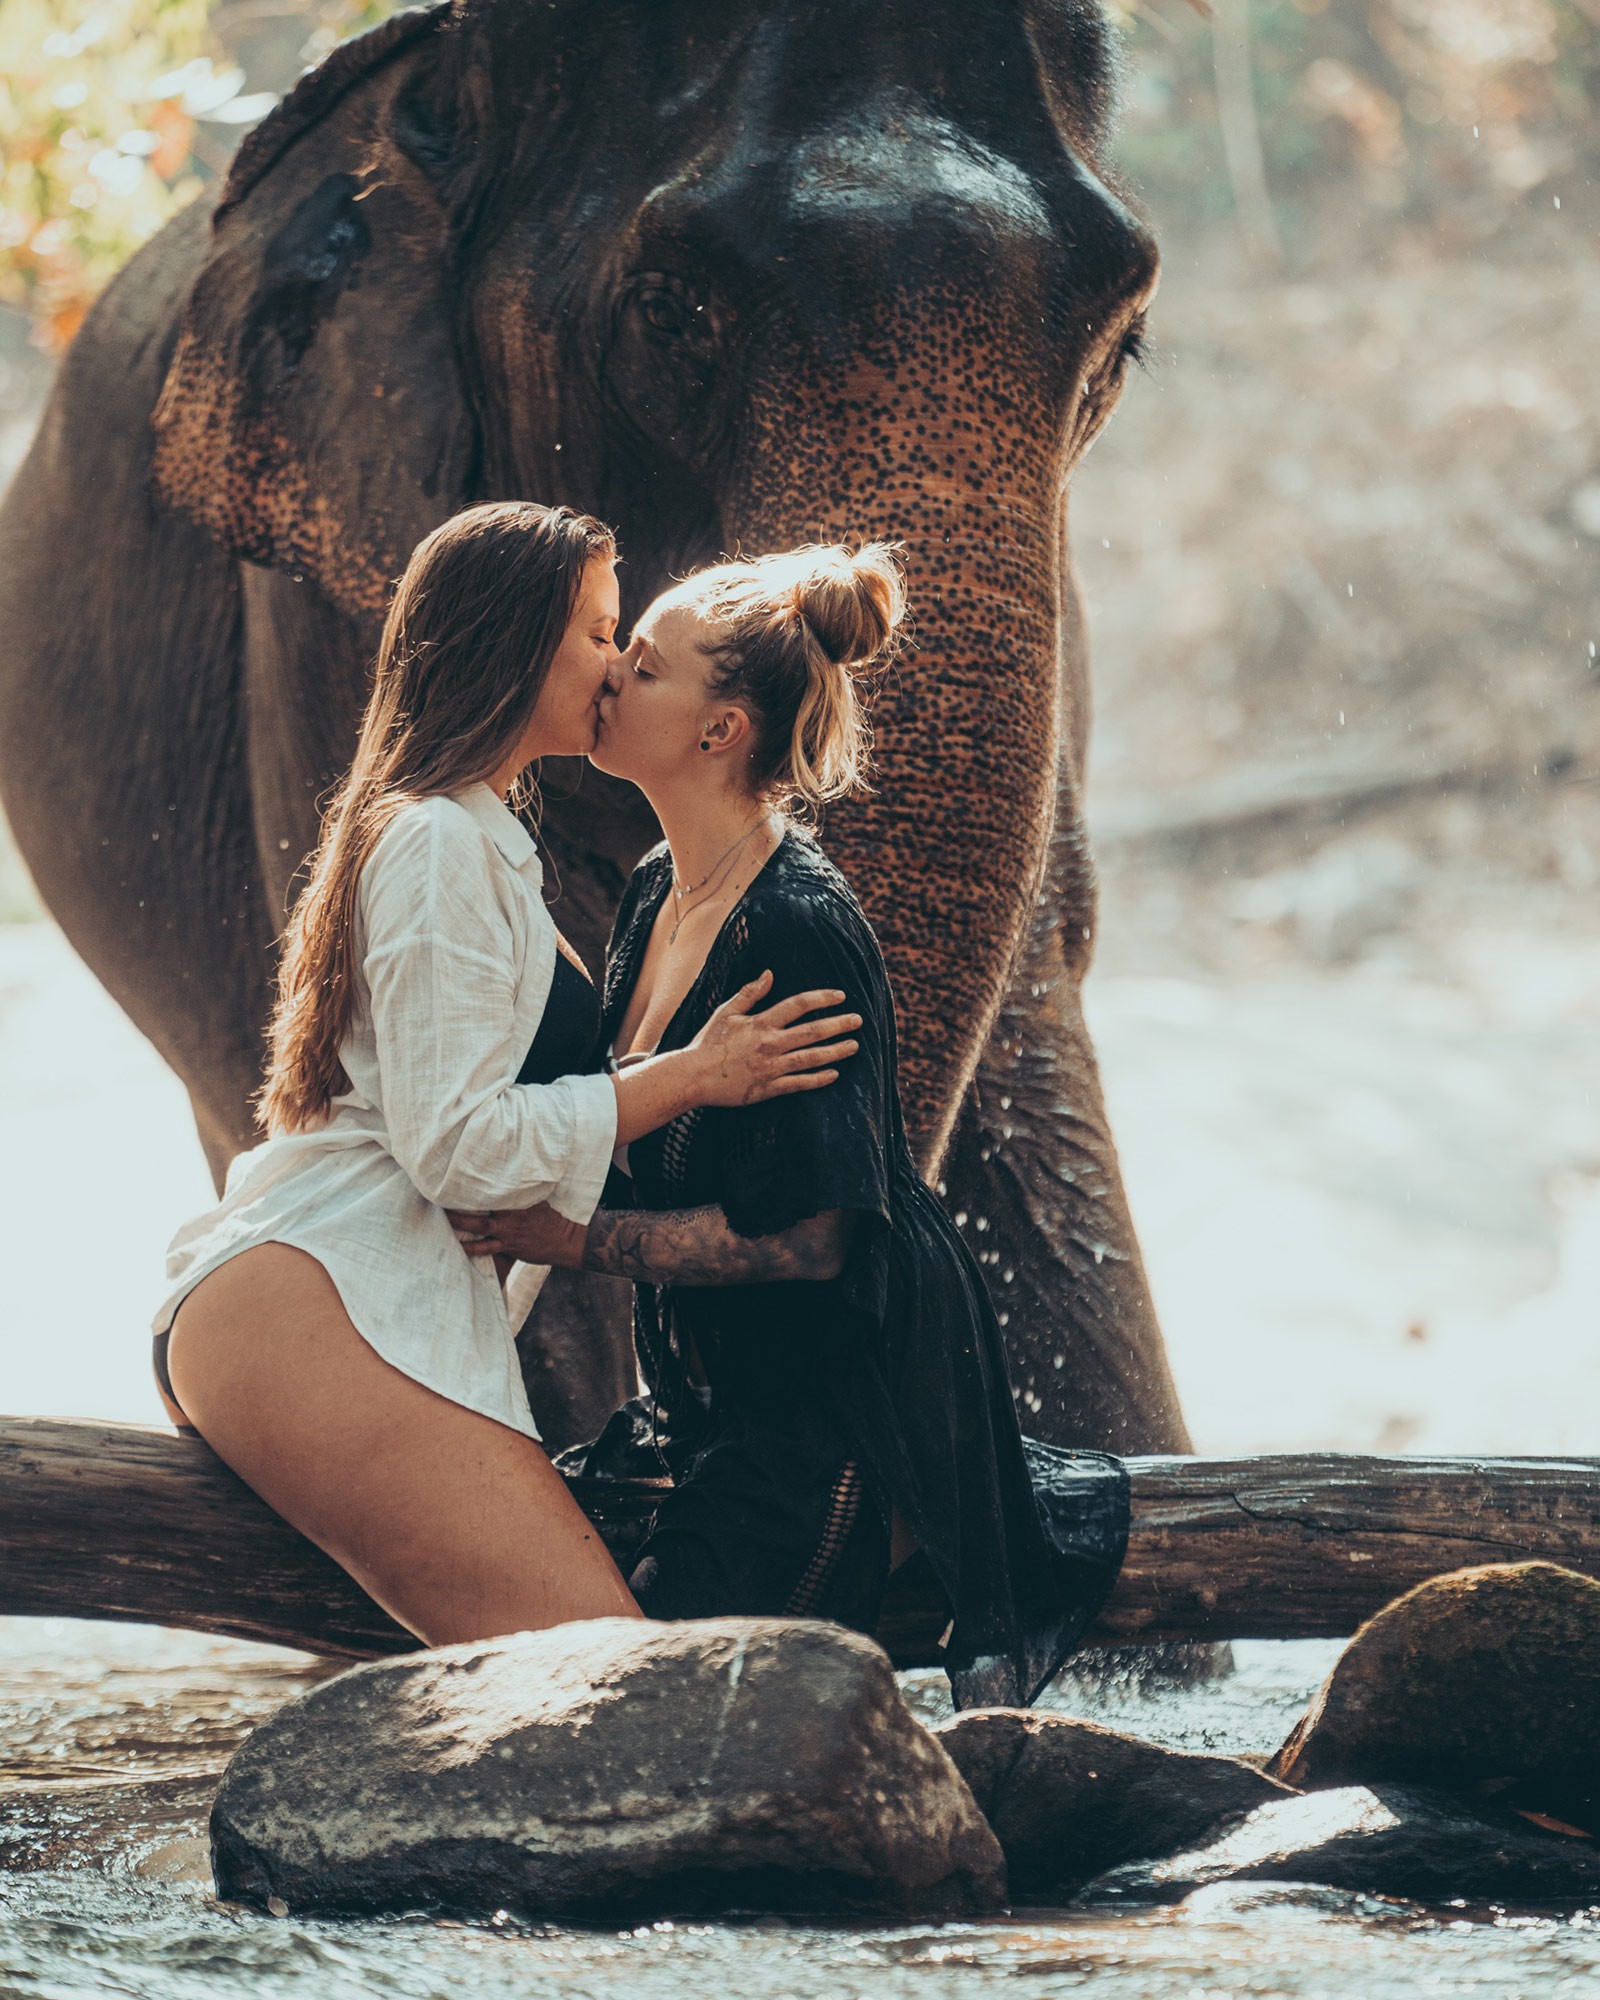 90 minute photoshoot with an elephant